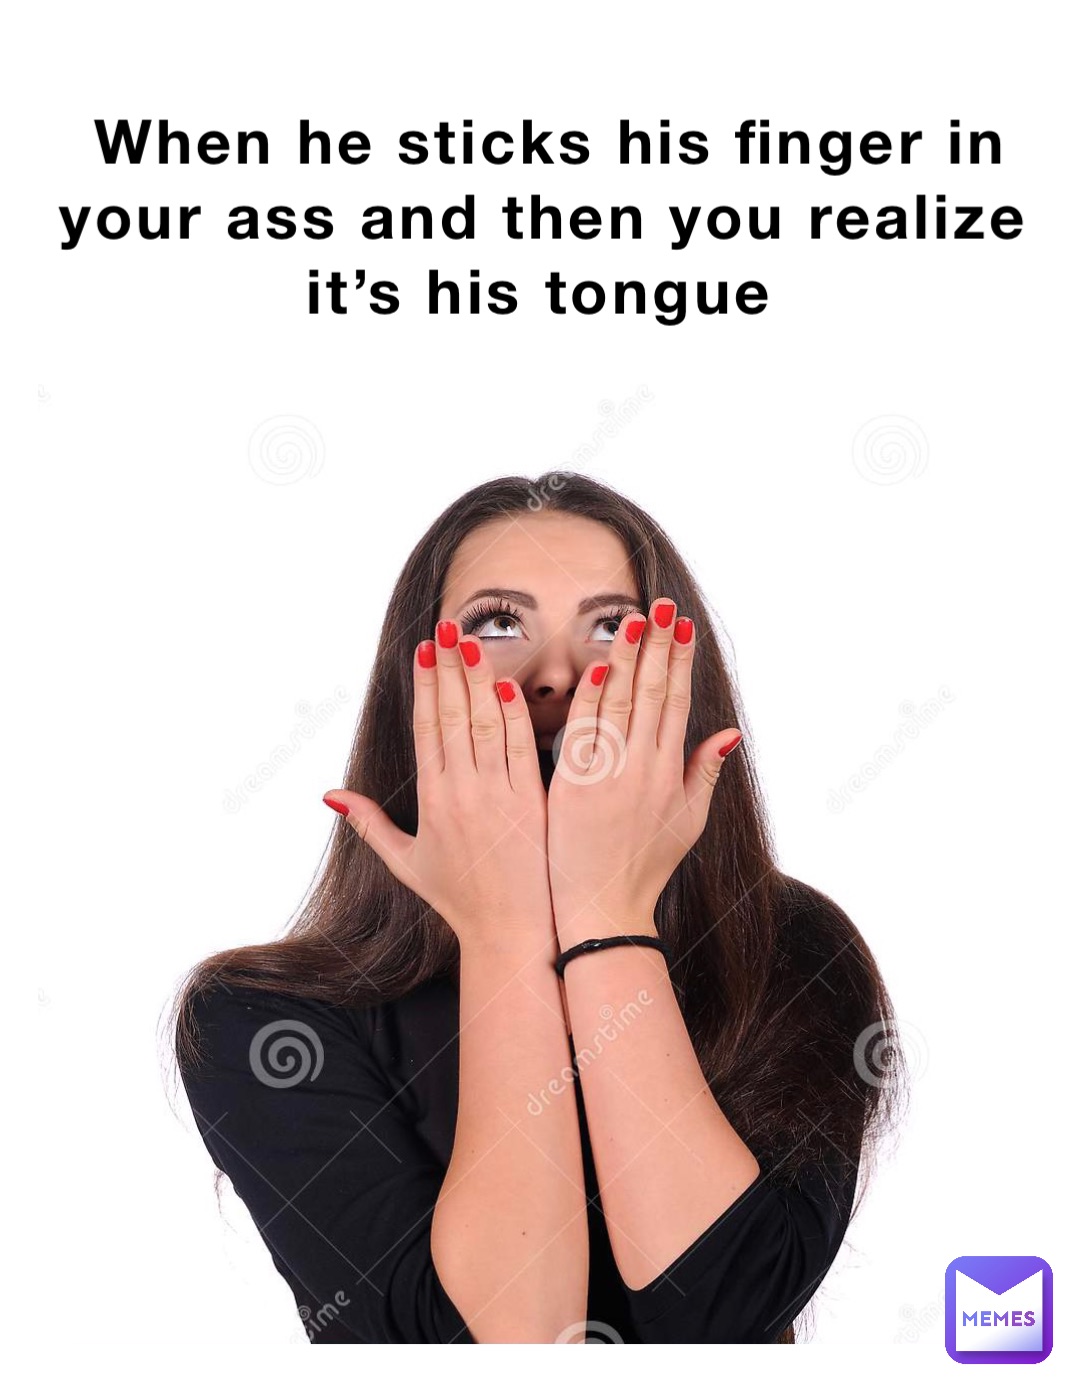 When He Sticks His Finger In Your Ass And Then You Realize Its His Tongue Kwrld999 Memes 5721